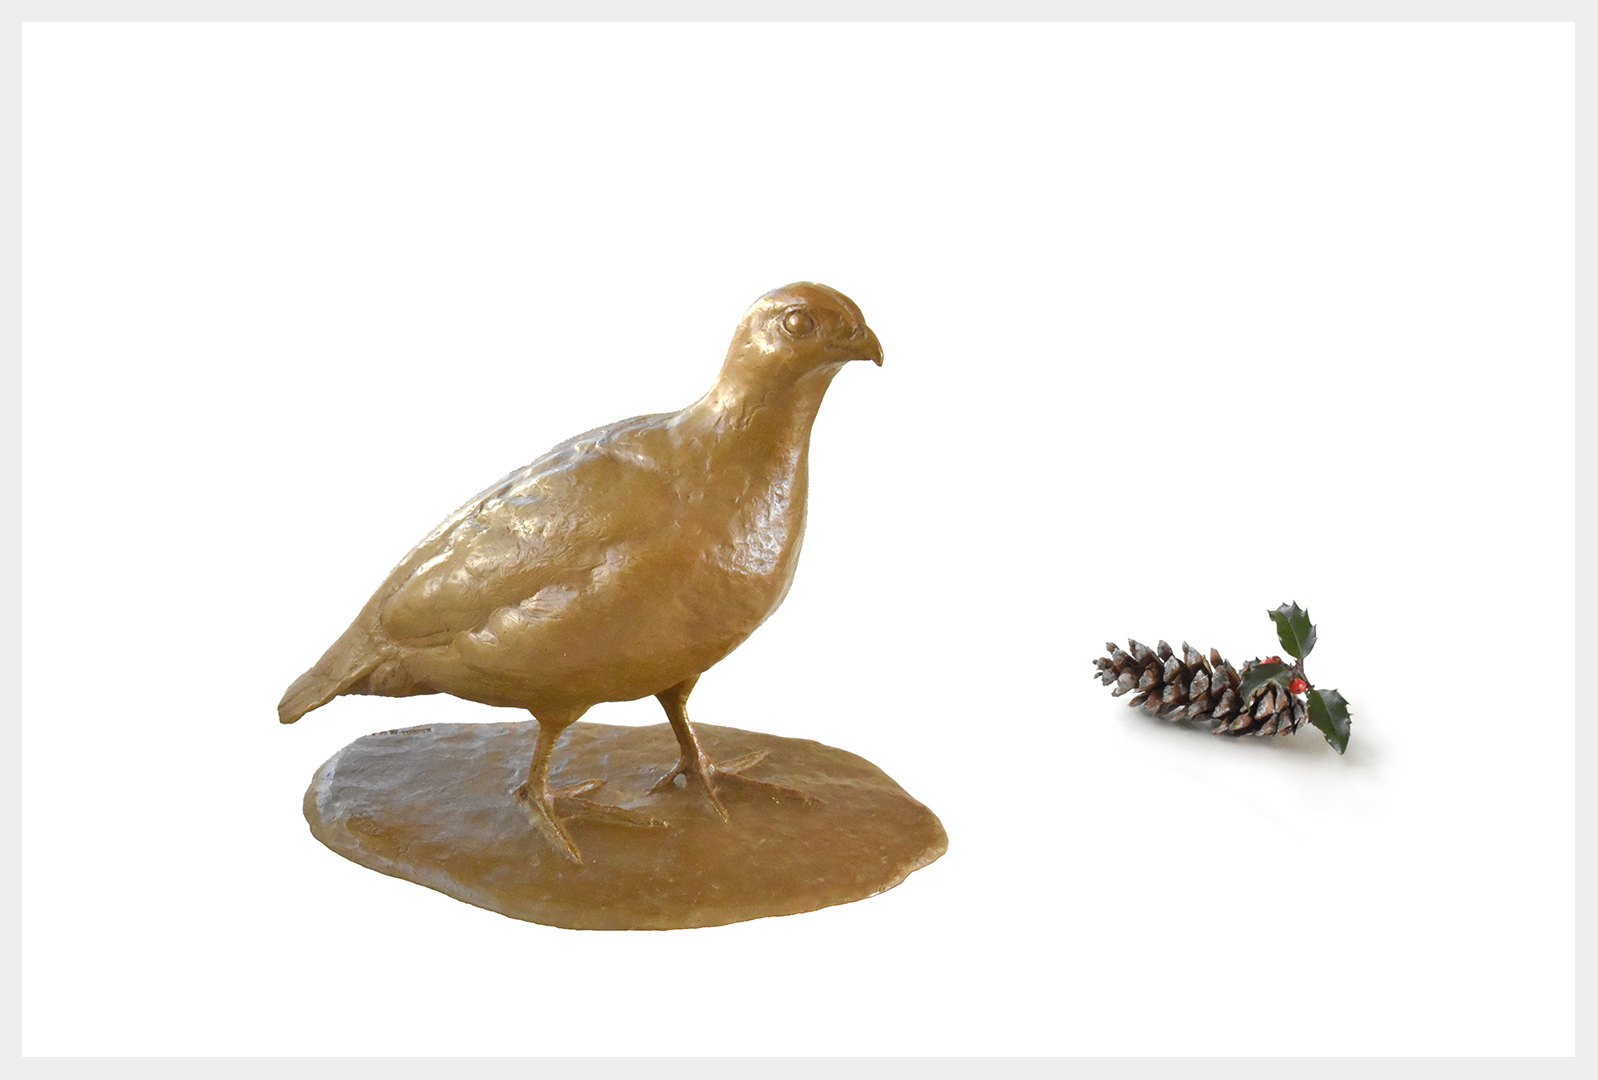 A realistic life-size bronze quail sculpture stepping forward on a base.